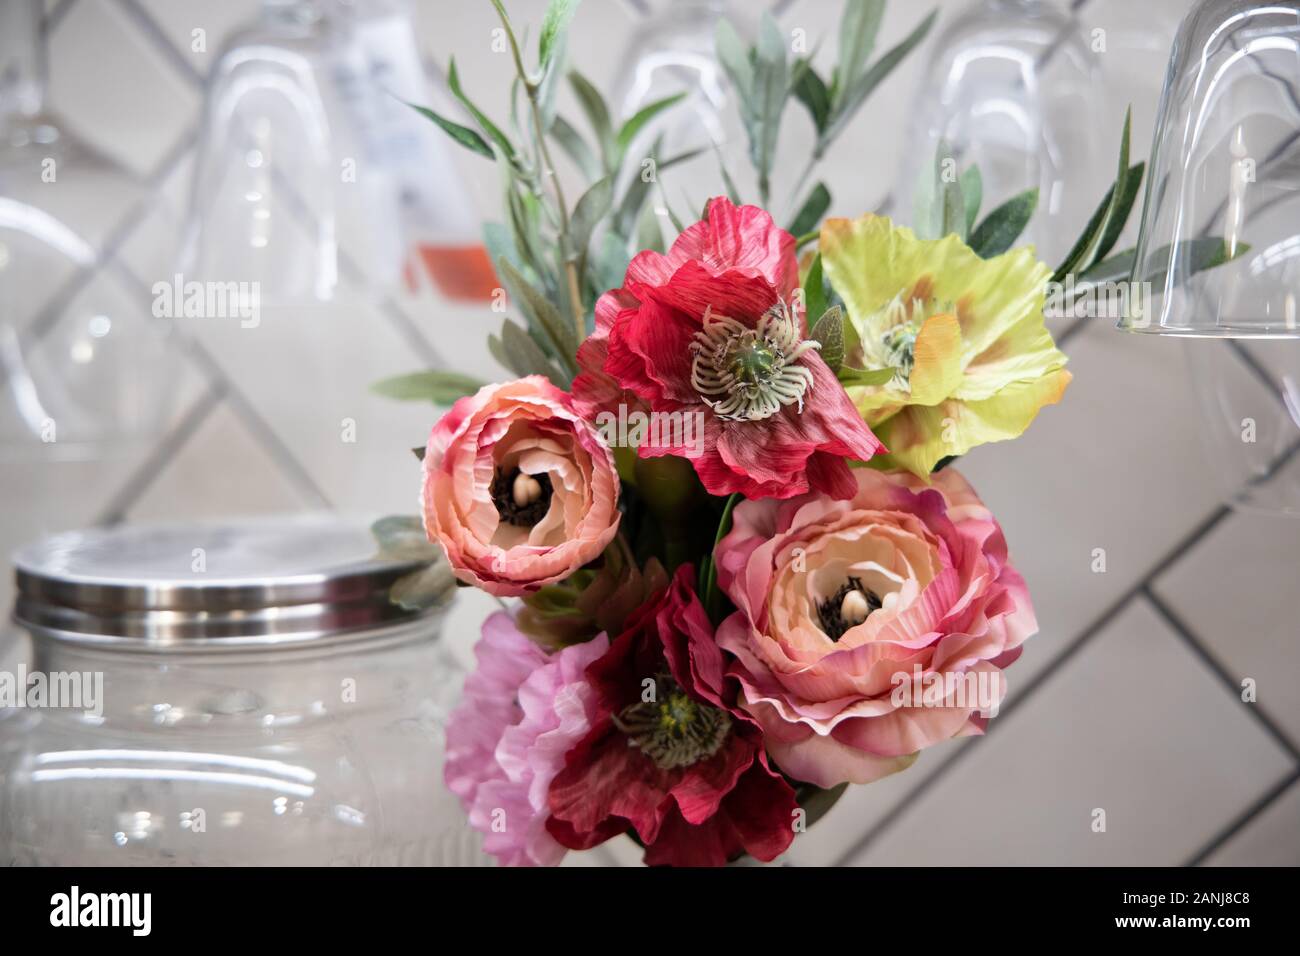 Bouquet from roses and other flowers on a table. Stock Photo